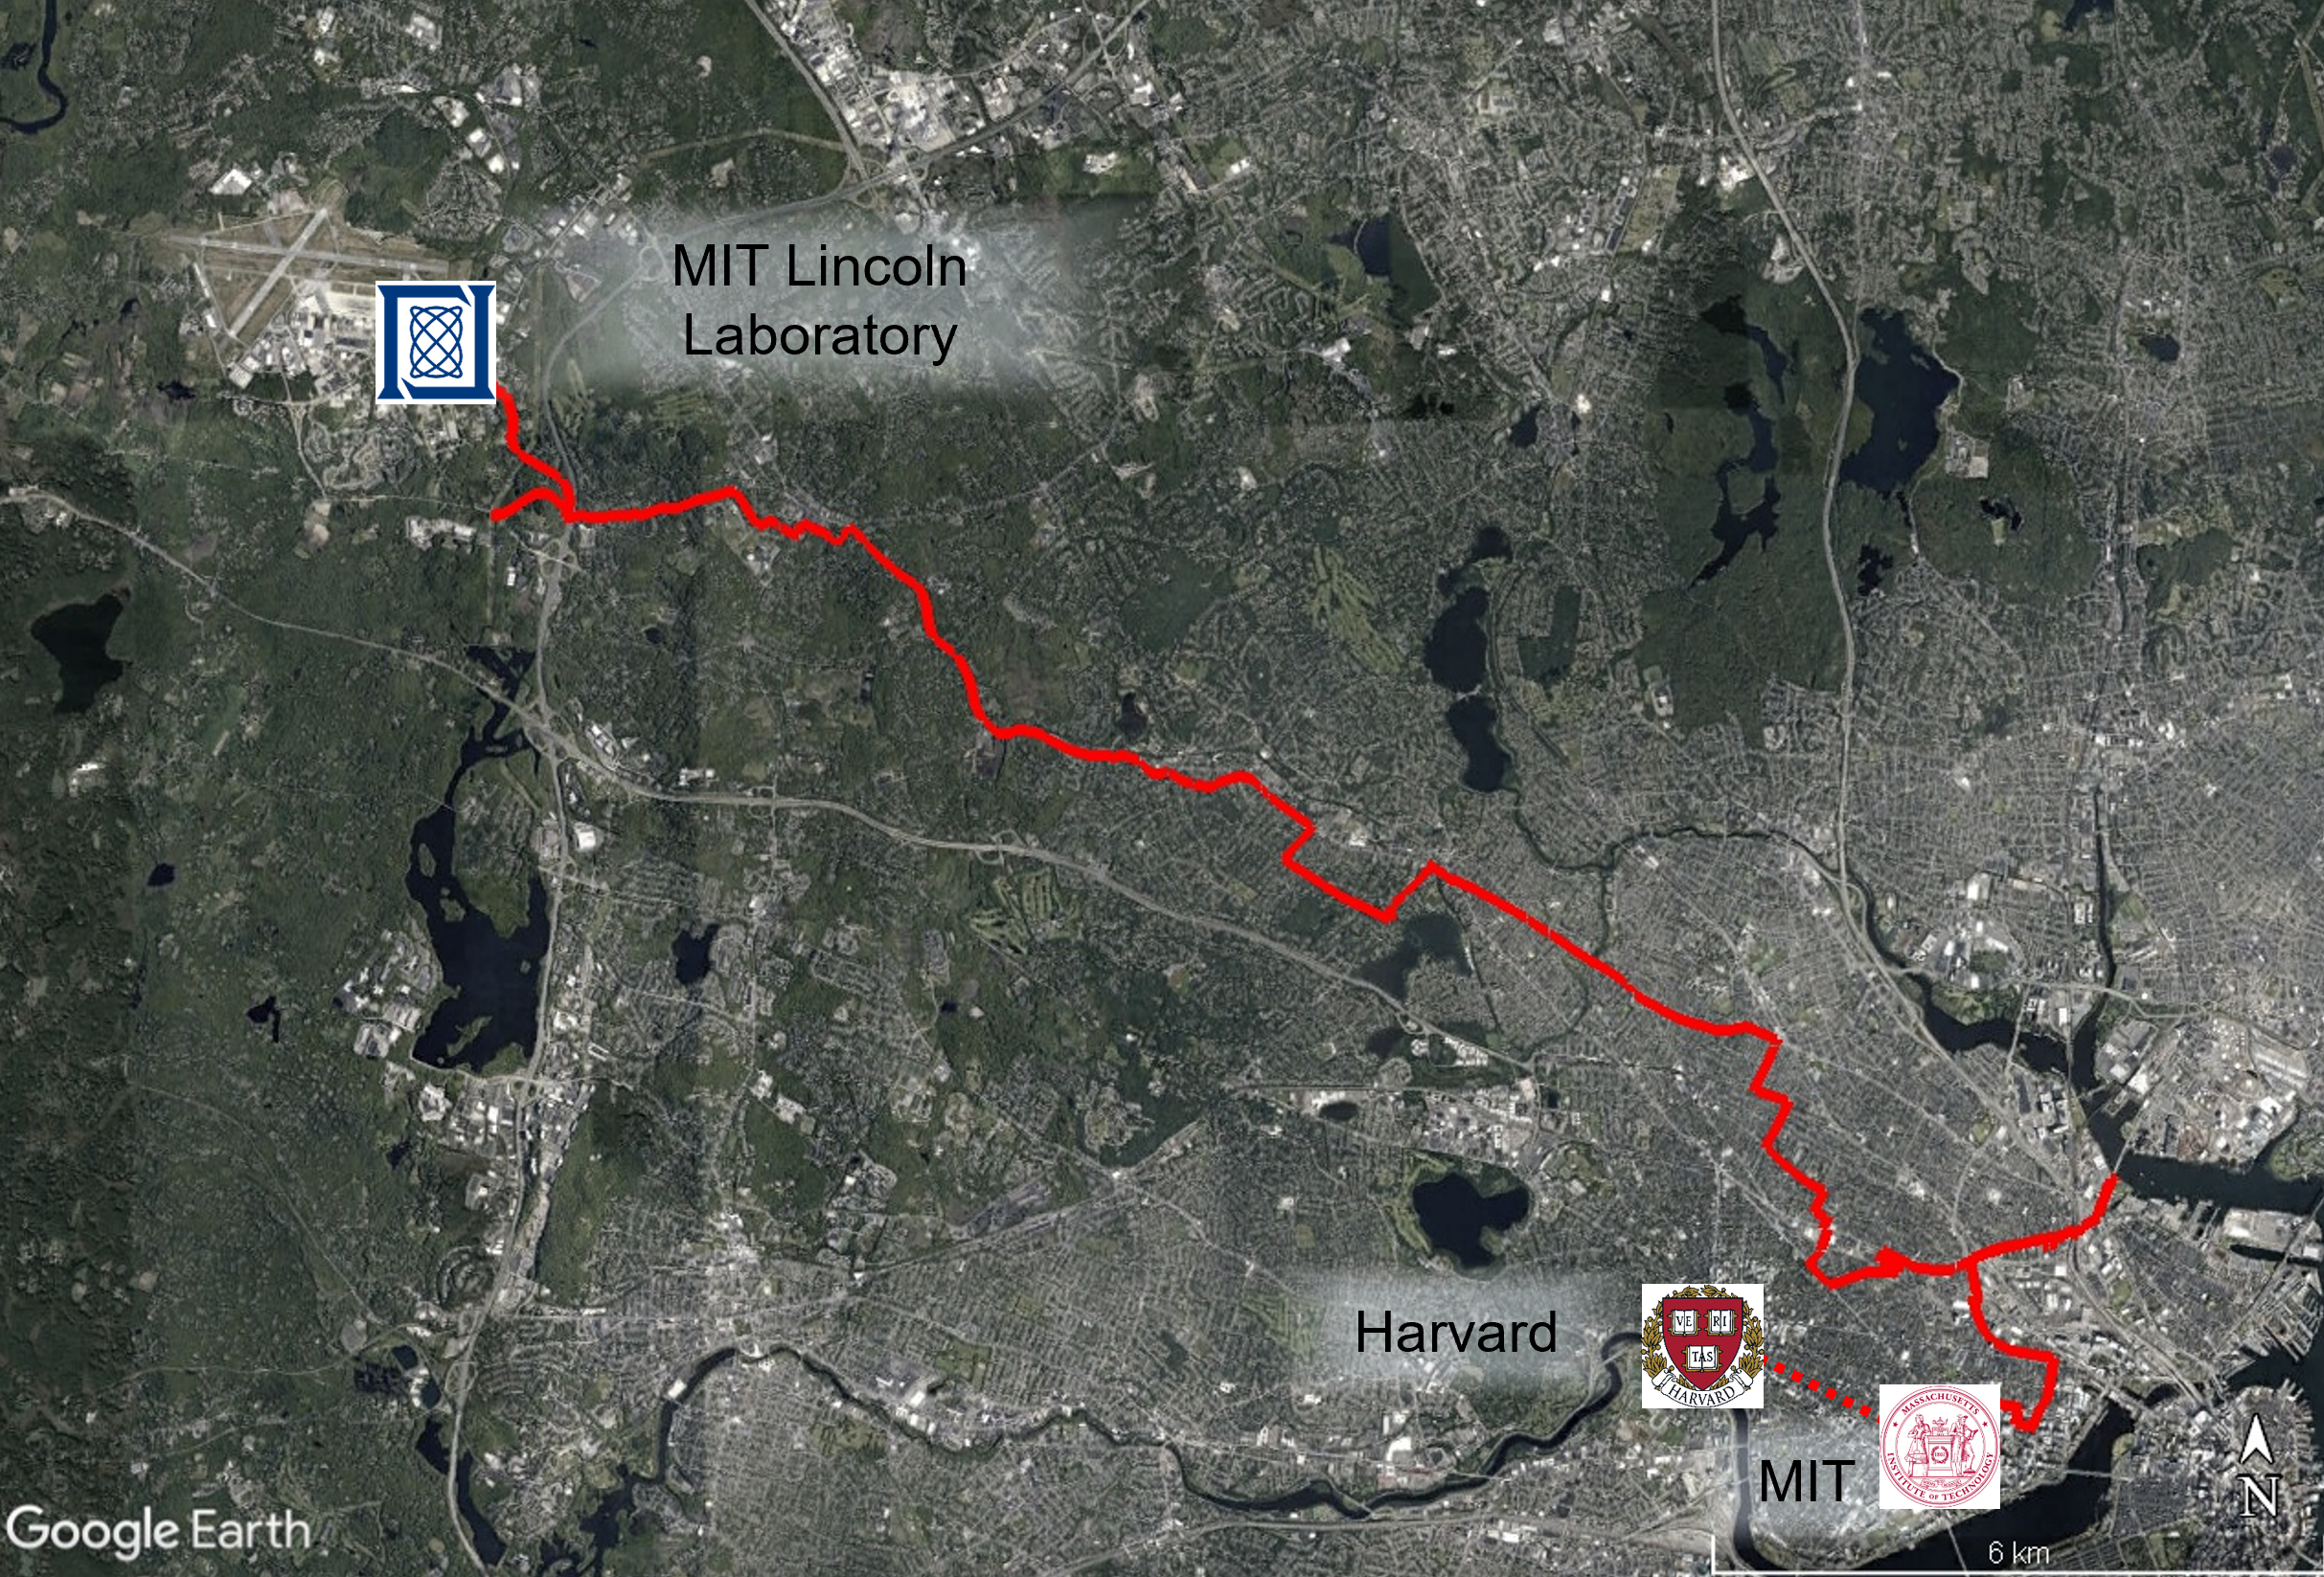 A Google Earth image with a red line connecting MIT Lincoln Laboratory, MIT, and Harvard.